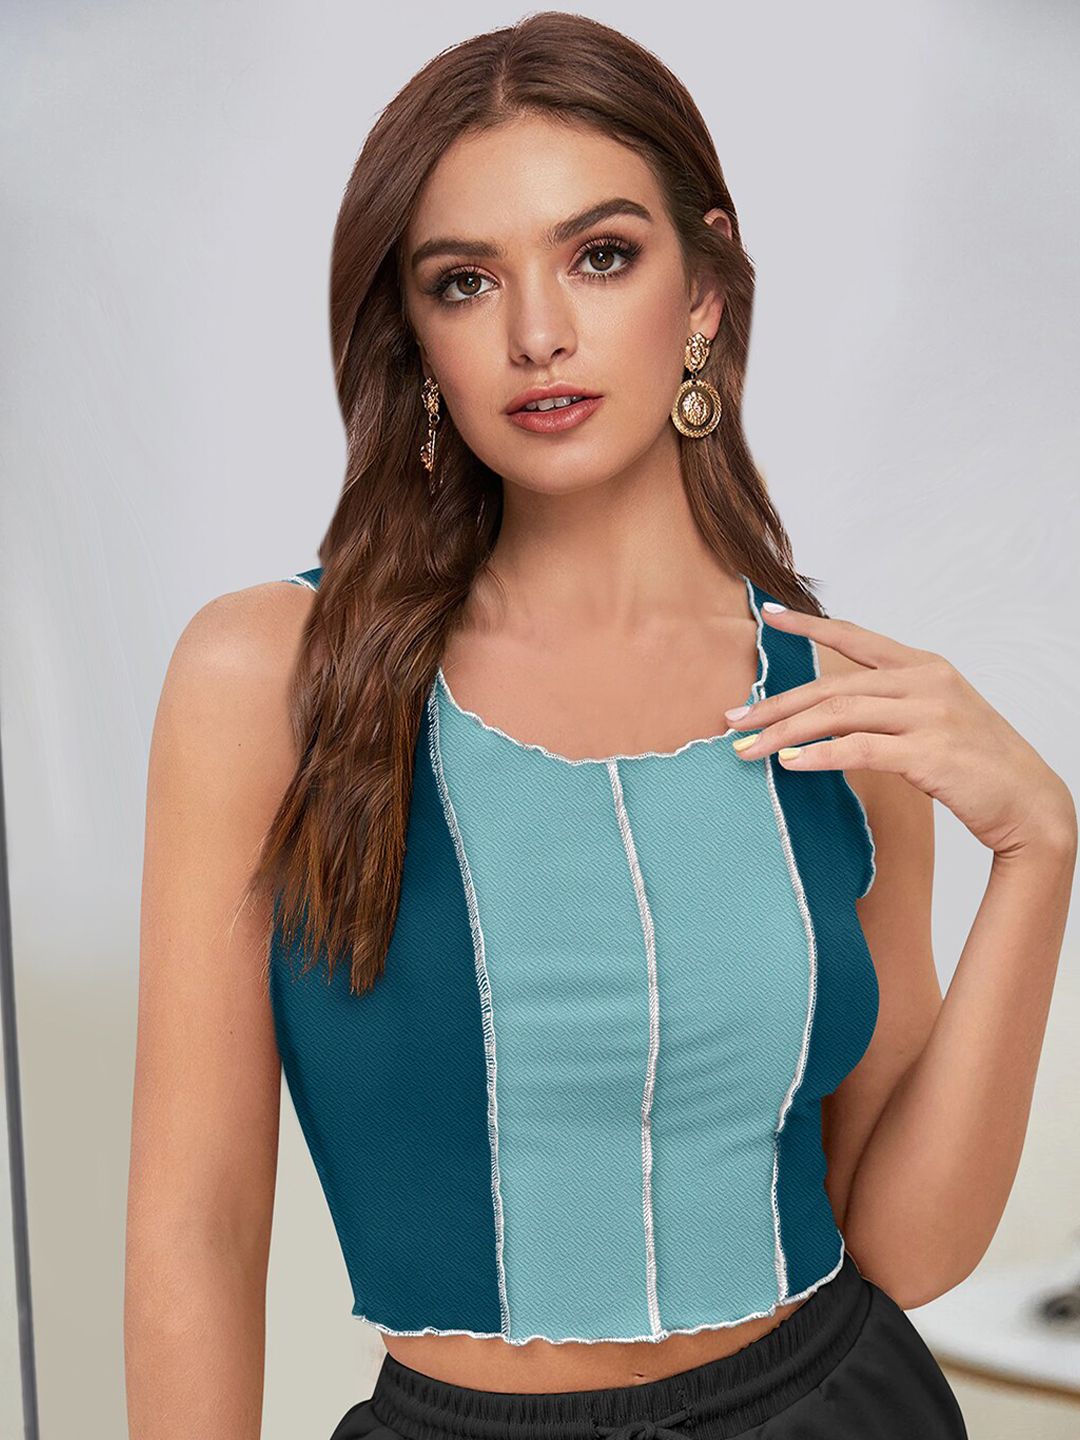 FAVRIZ Turquoise Colourblocked Crop Fitted Top Price in India